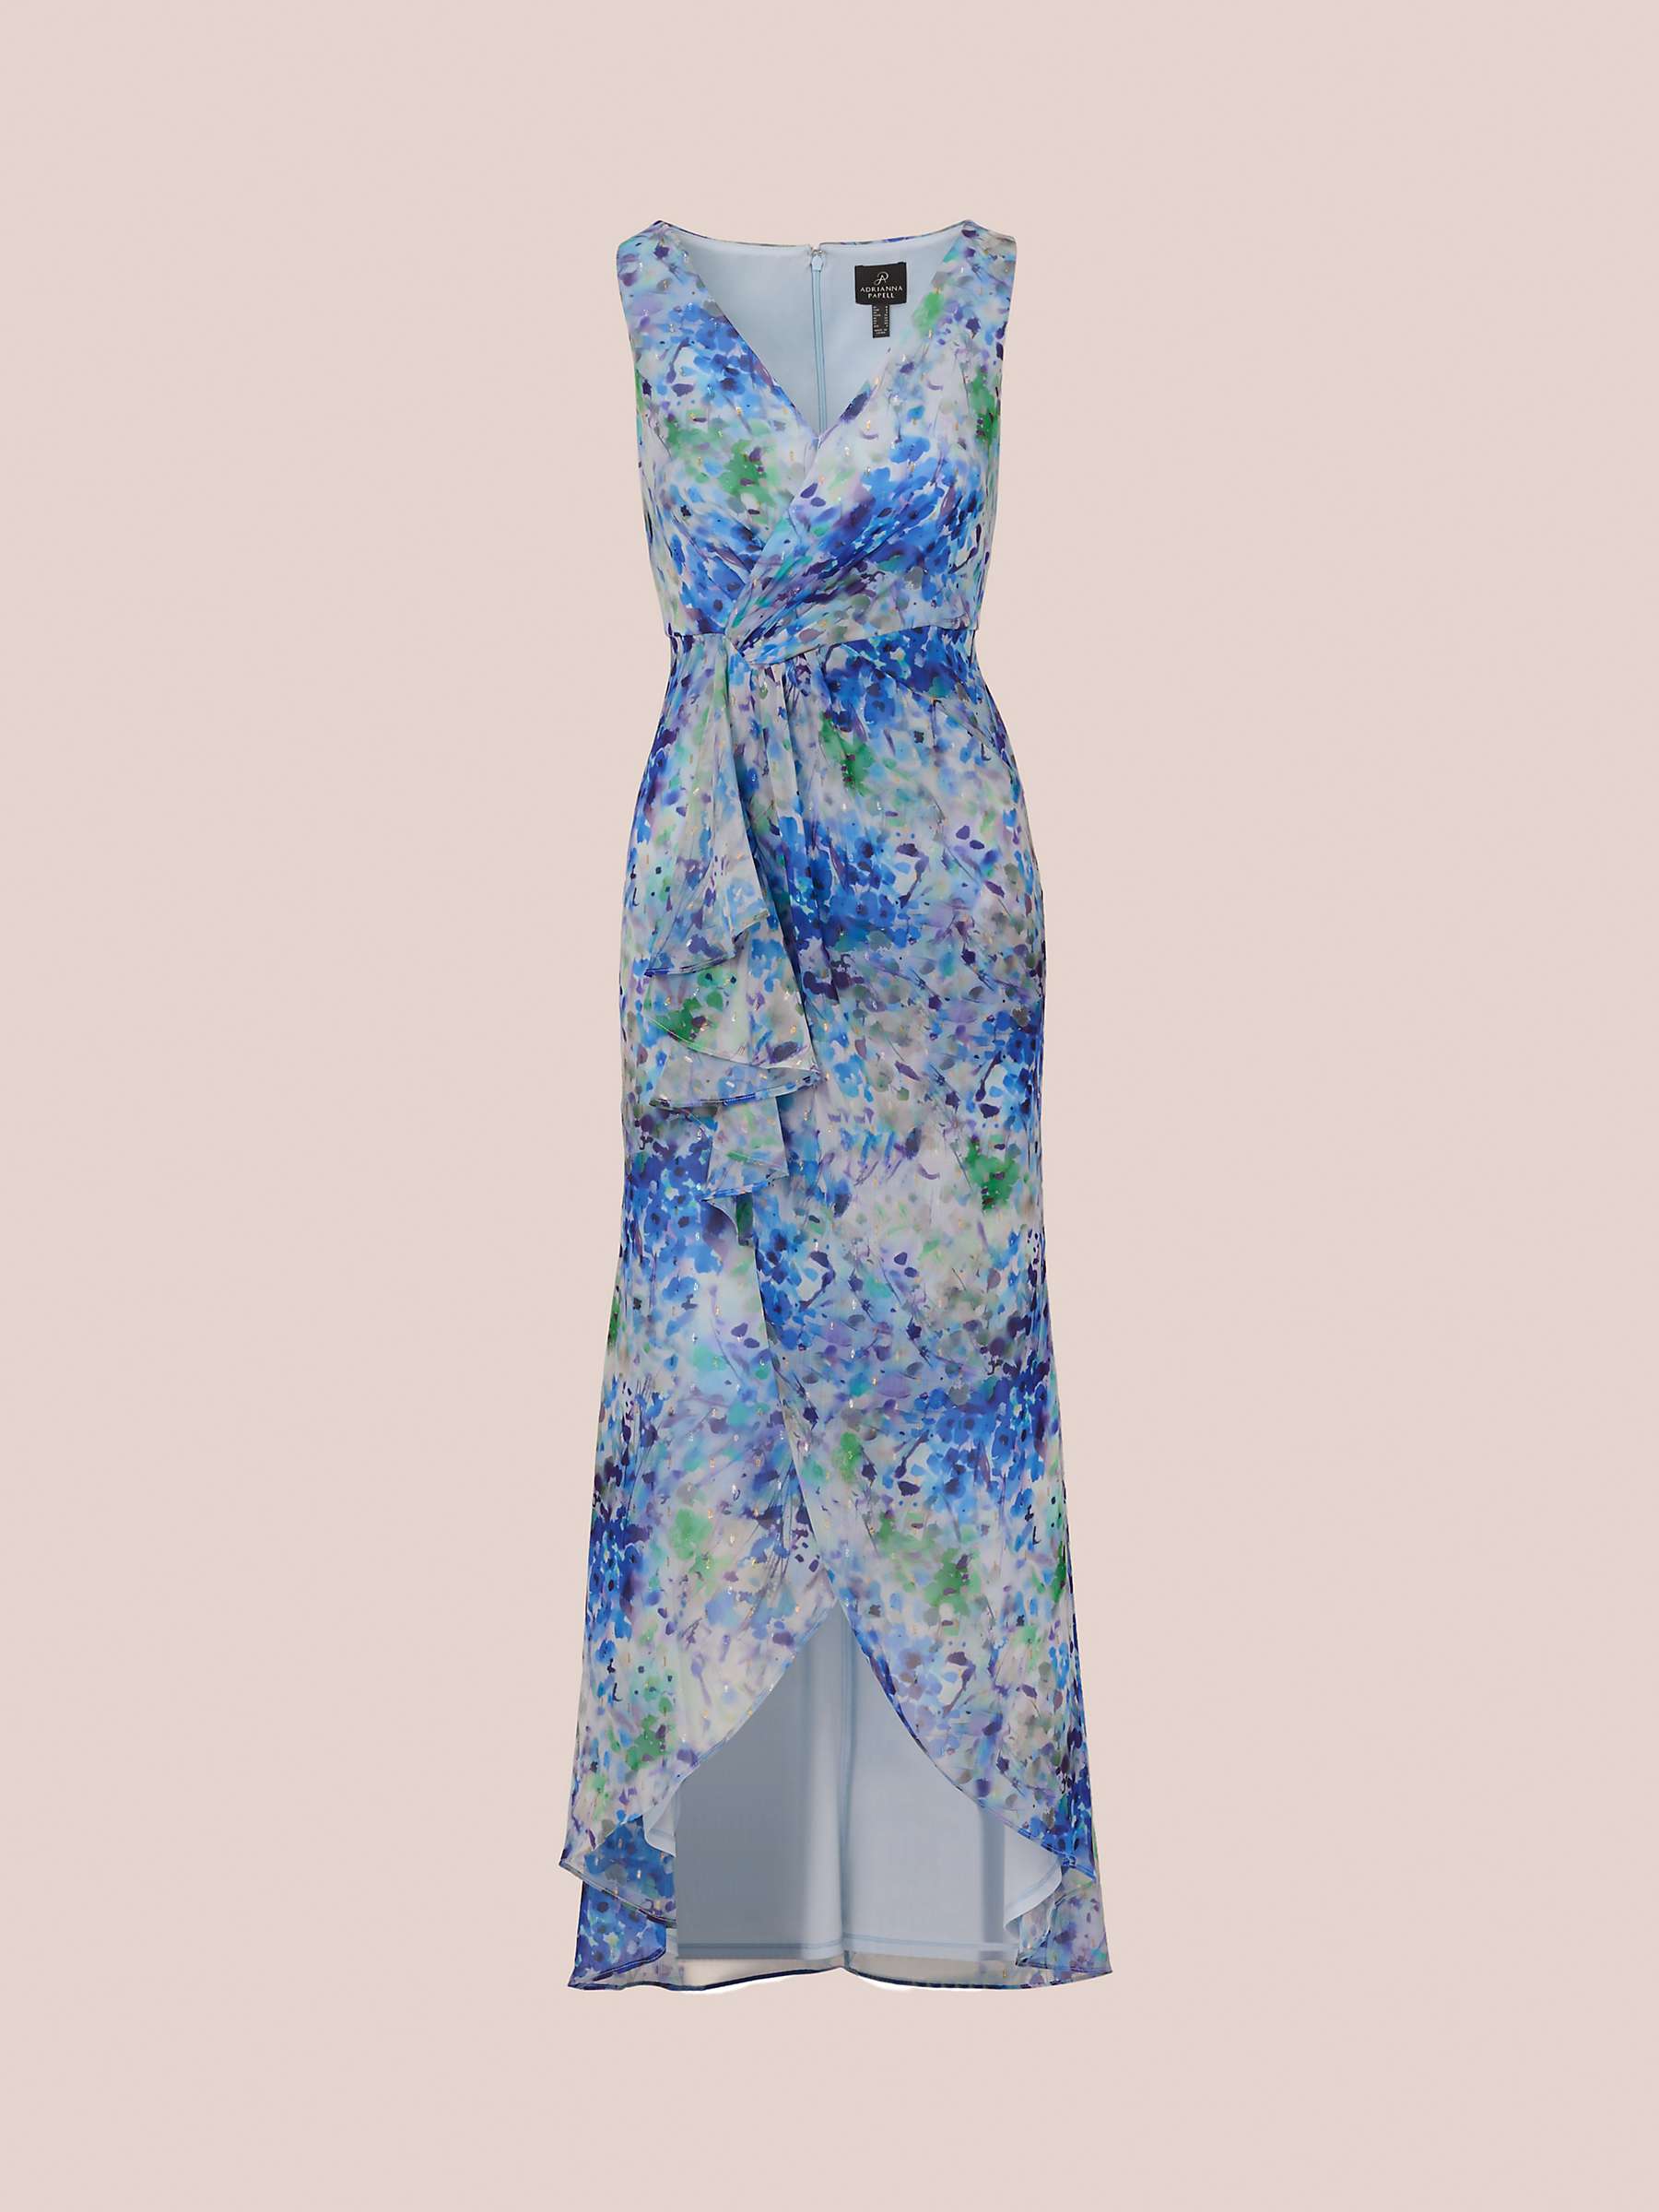 Buy Adrianna Papell Metallic Floral Maxi Dress, Blue/Multi Online at johnlewis.com